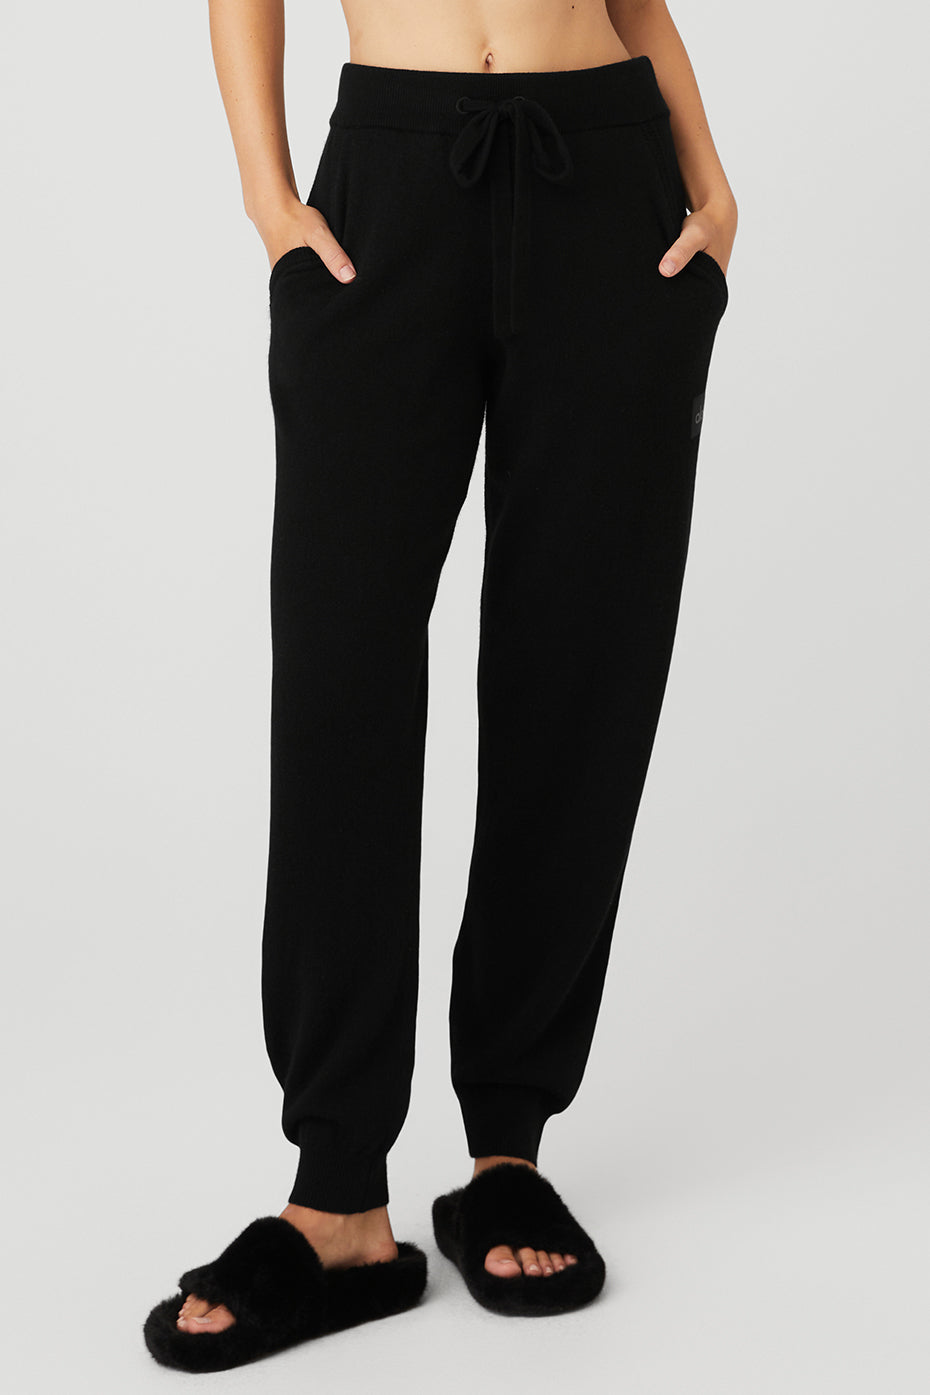 Alo Yoga Urban Moto Sweatpants in Black Size Small Athleisure Joggers - $45  - From Meghan